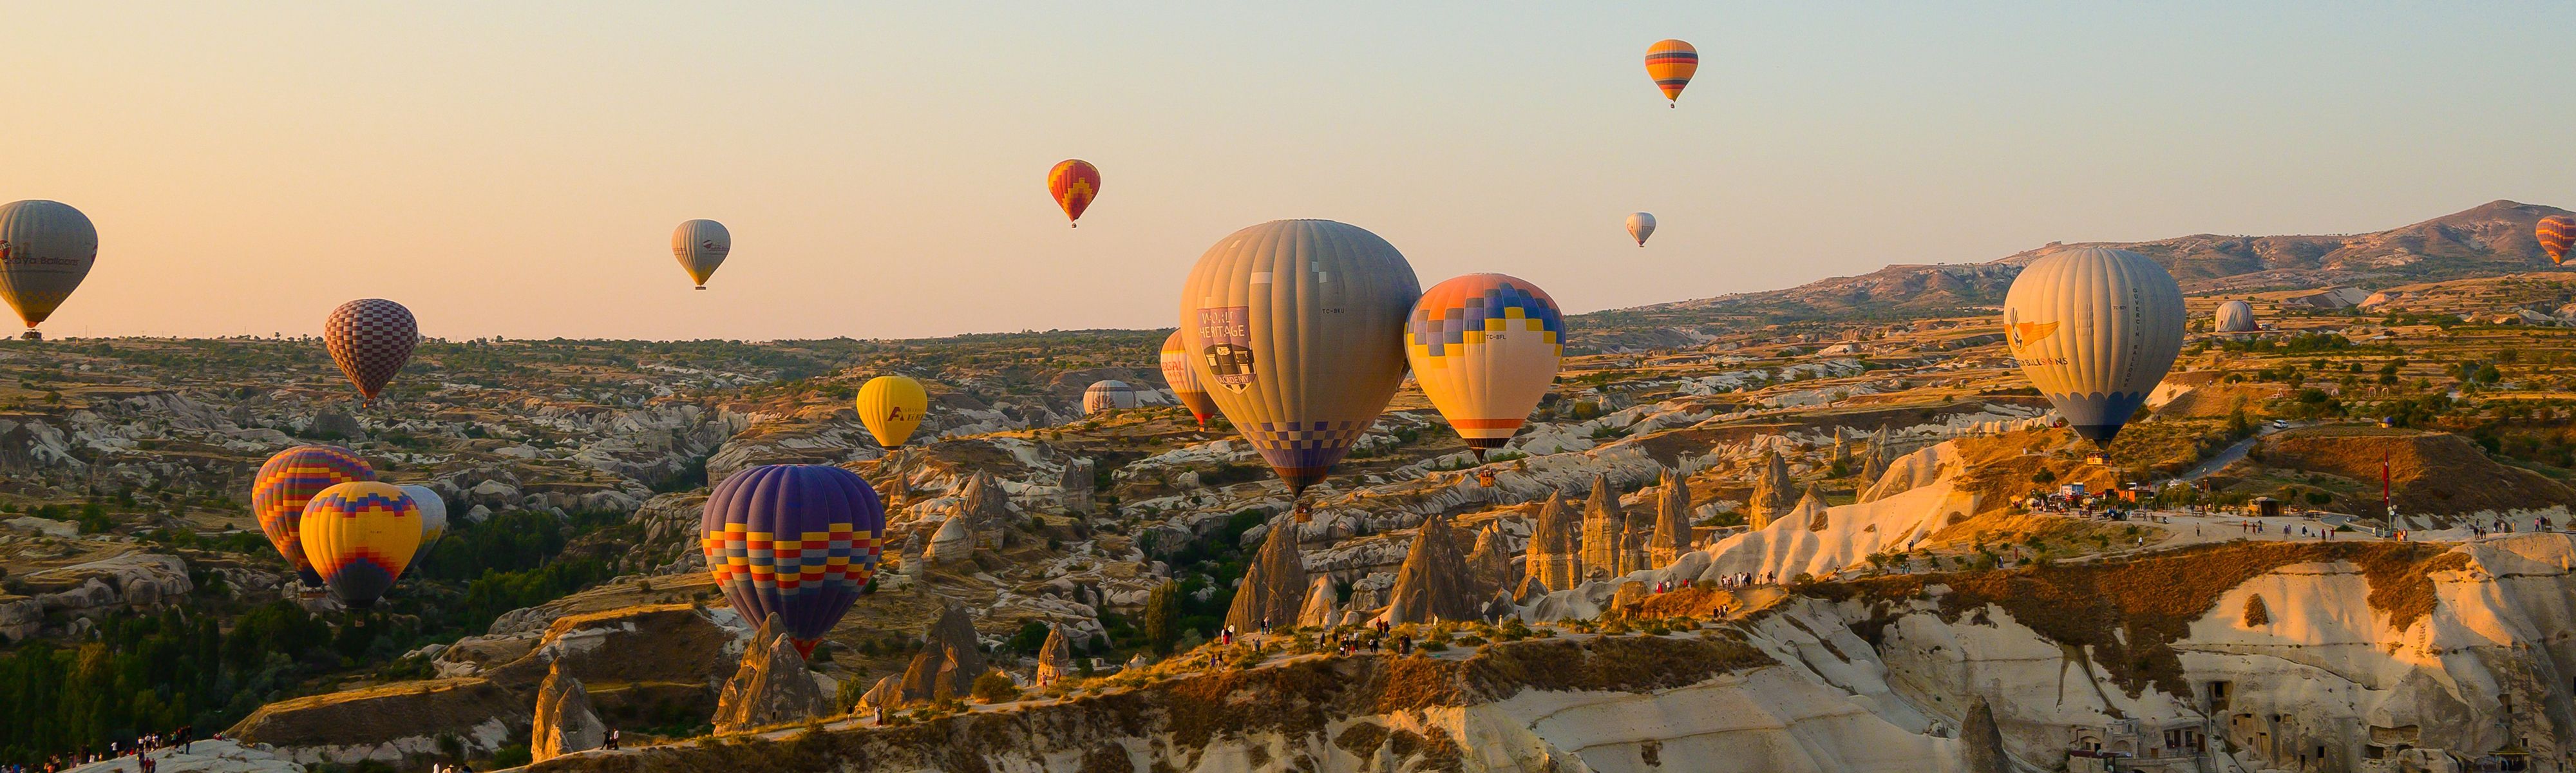 hot air balloons floating in the sky during sunset in Turkey